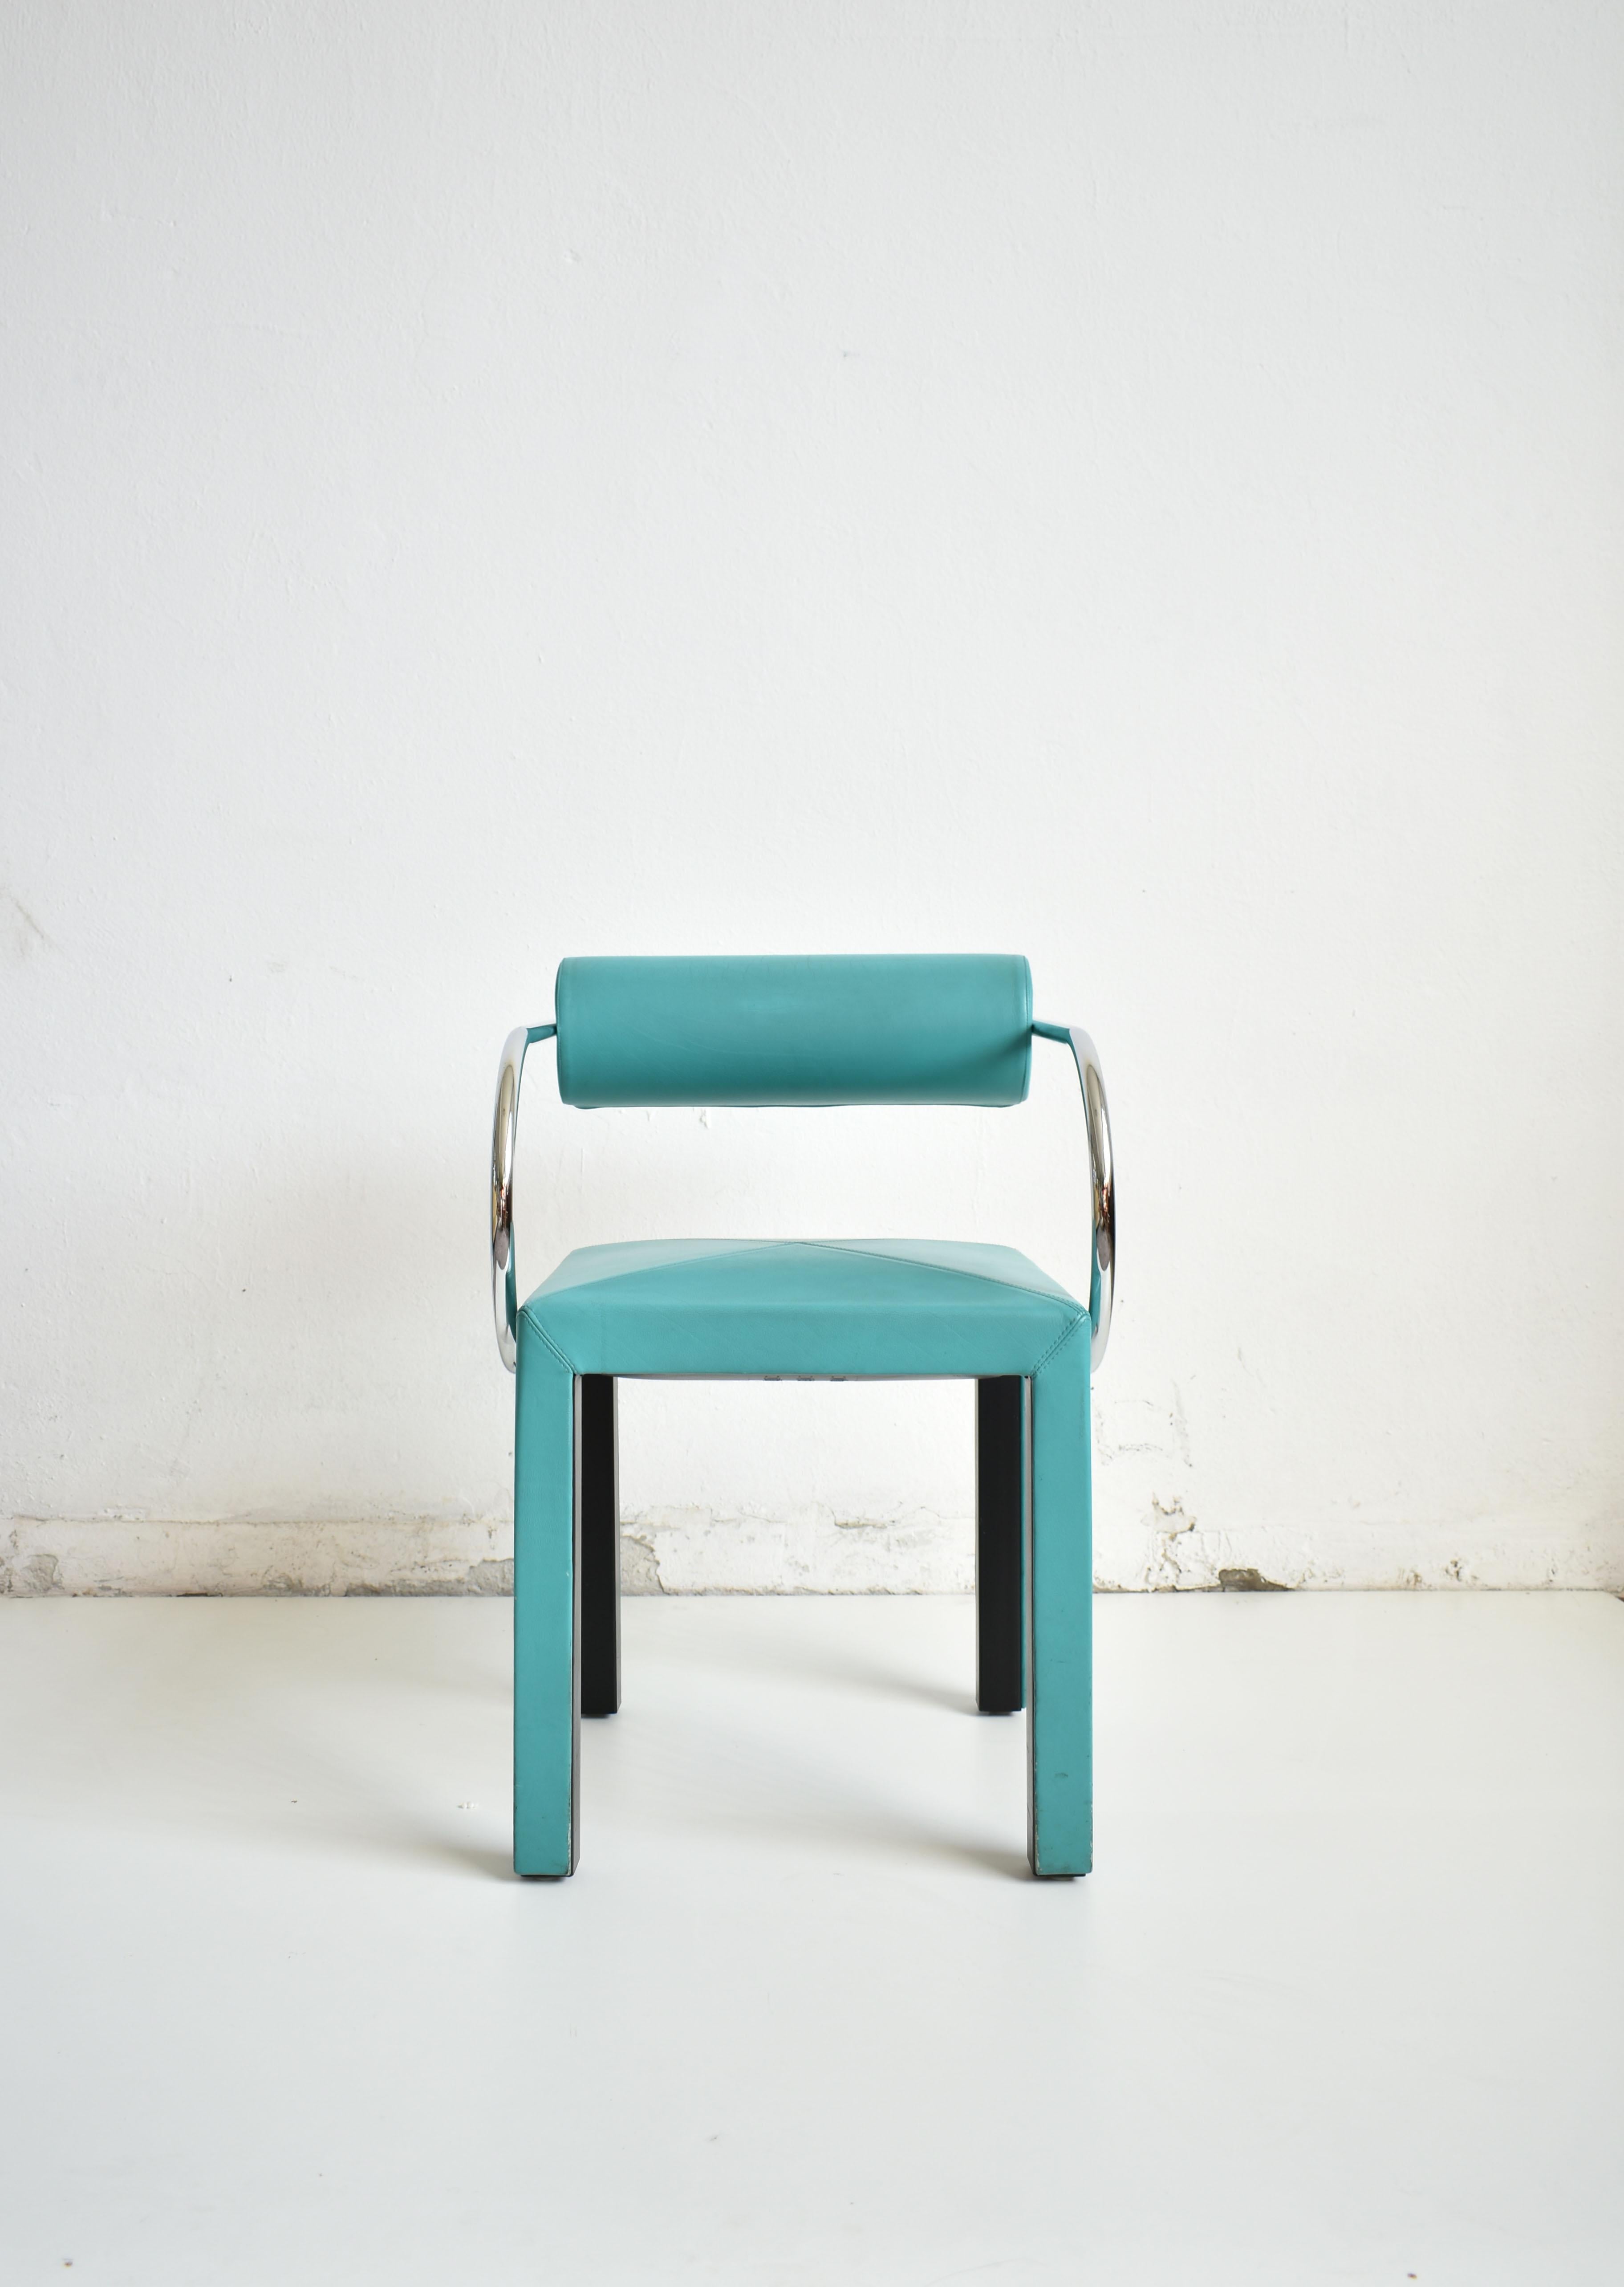 paolo piva chair